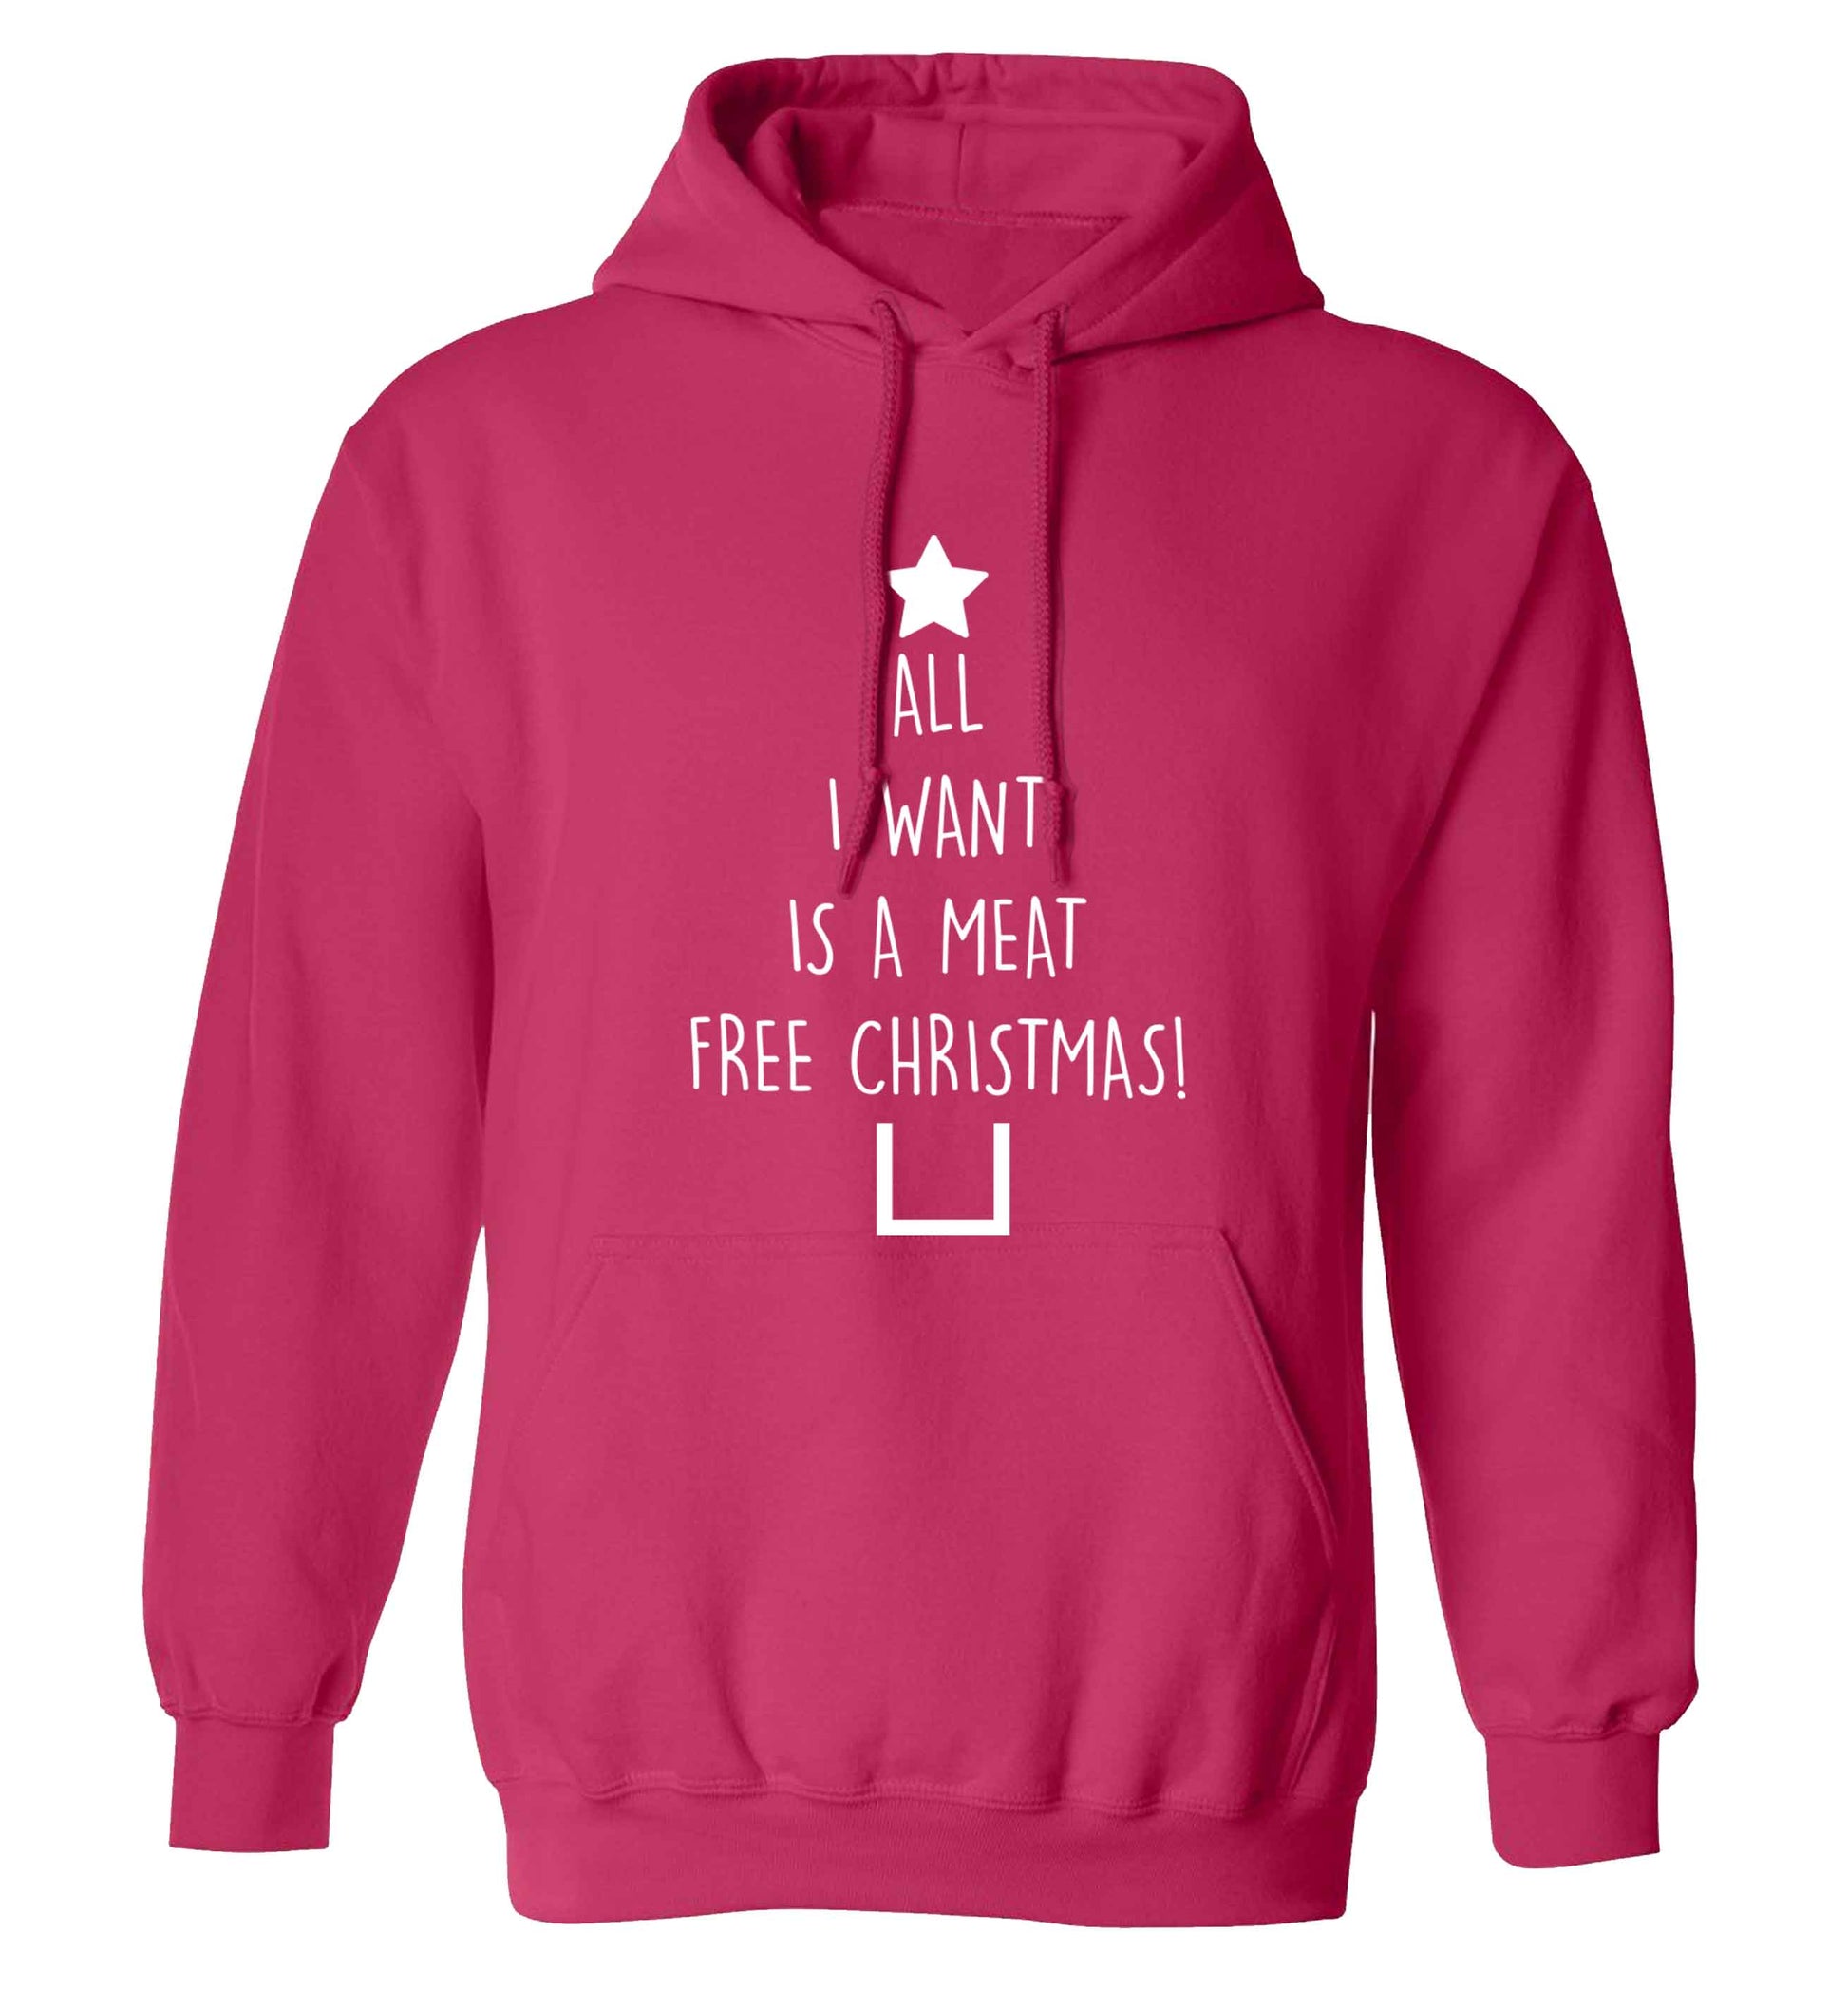 All I want is a meat free Christmas adults unisex pink hoodie 2XL